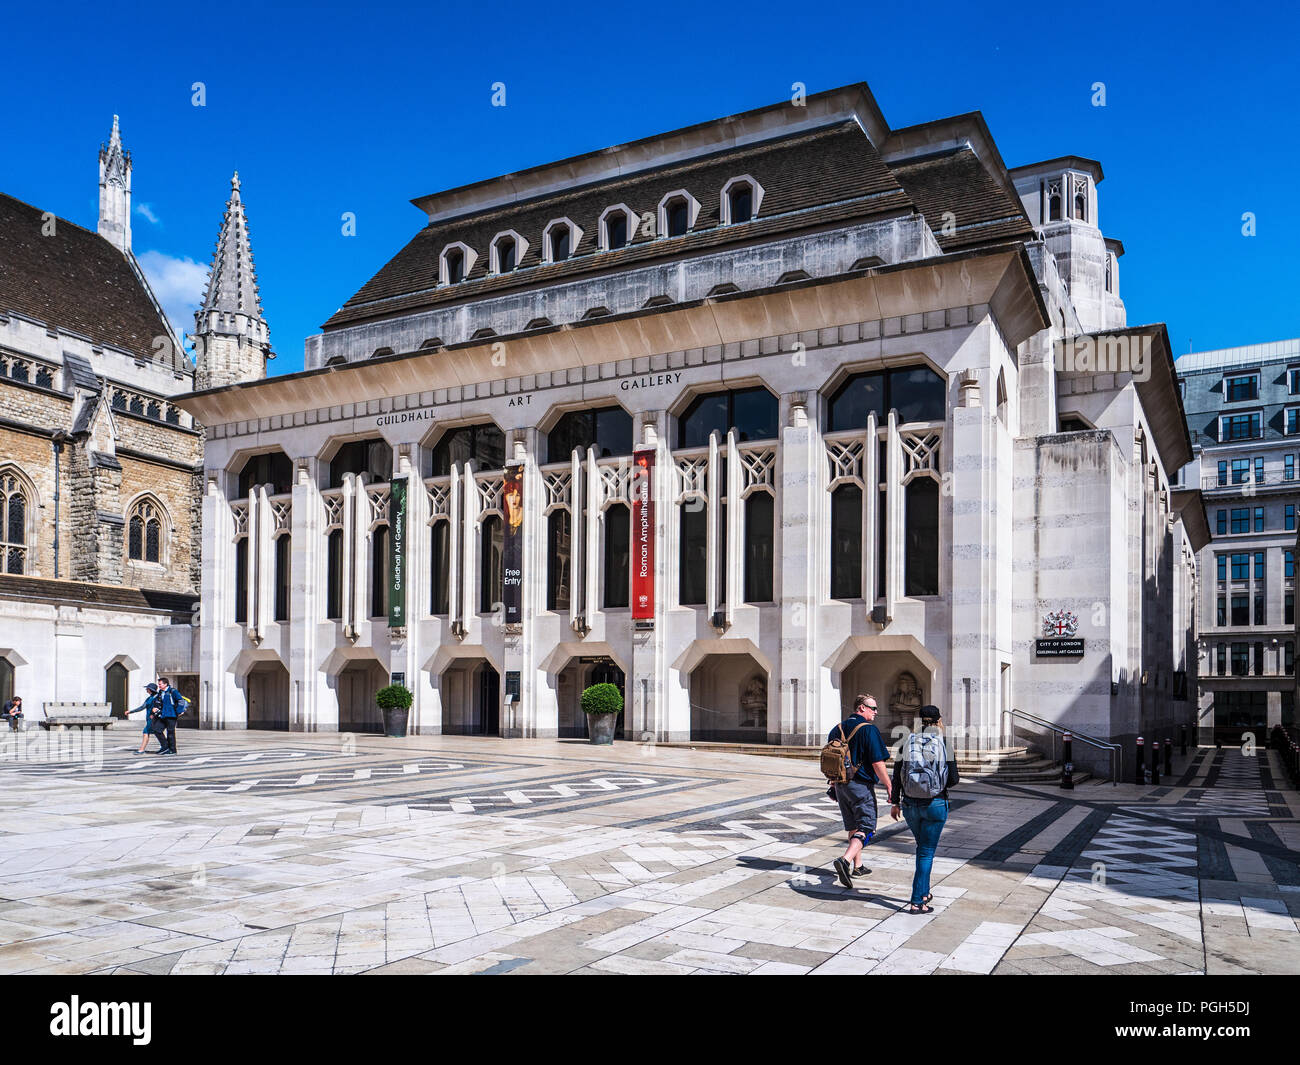 The Guildhall Art Gallery in the Guildhall complex in the City of London, UK. The gallery contains artworks dating from 1670 to the present Stock Photo